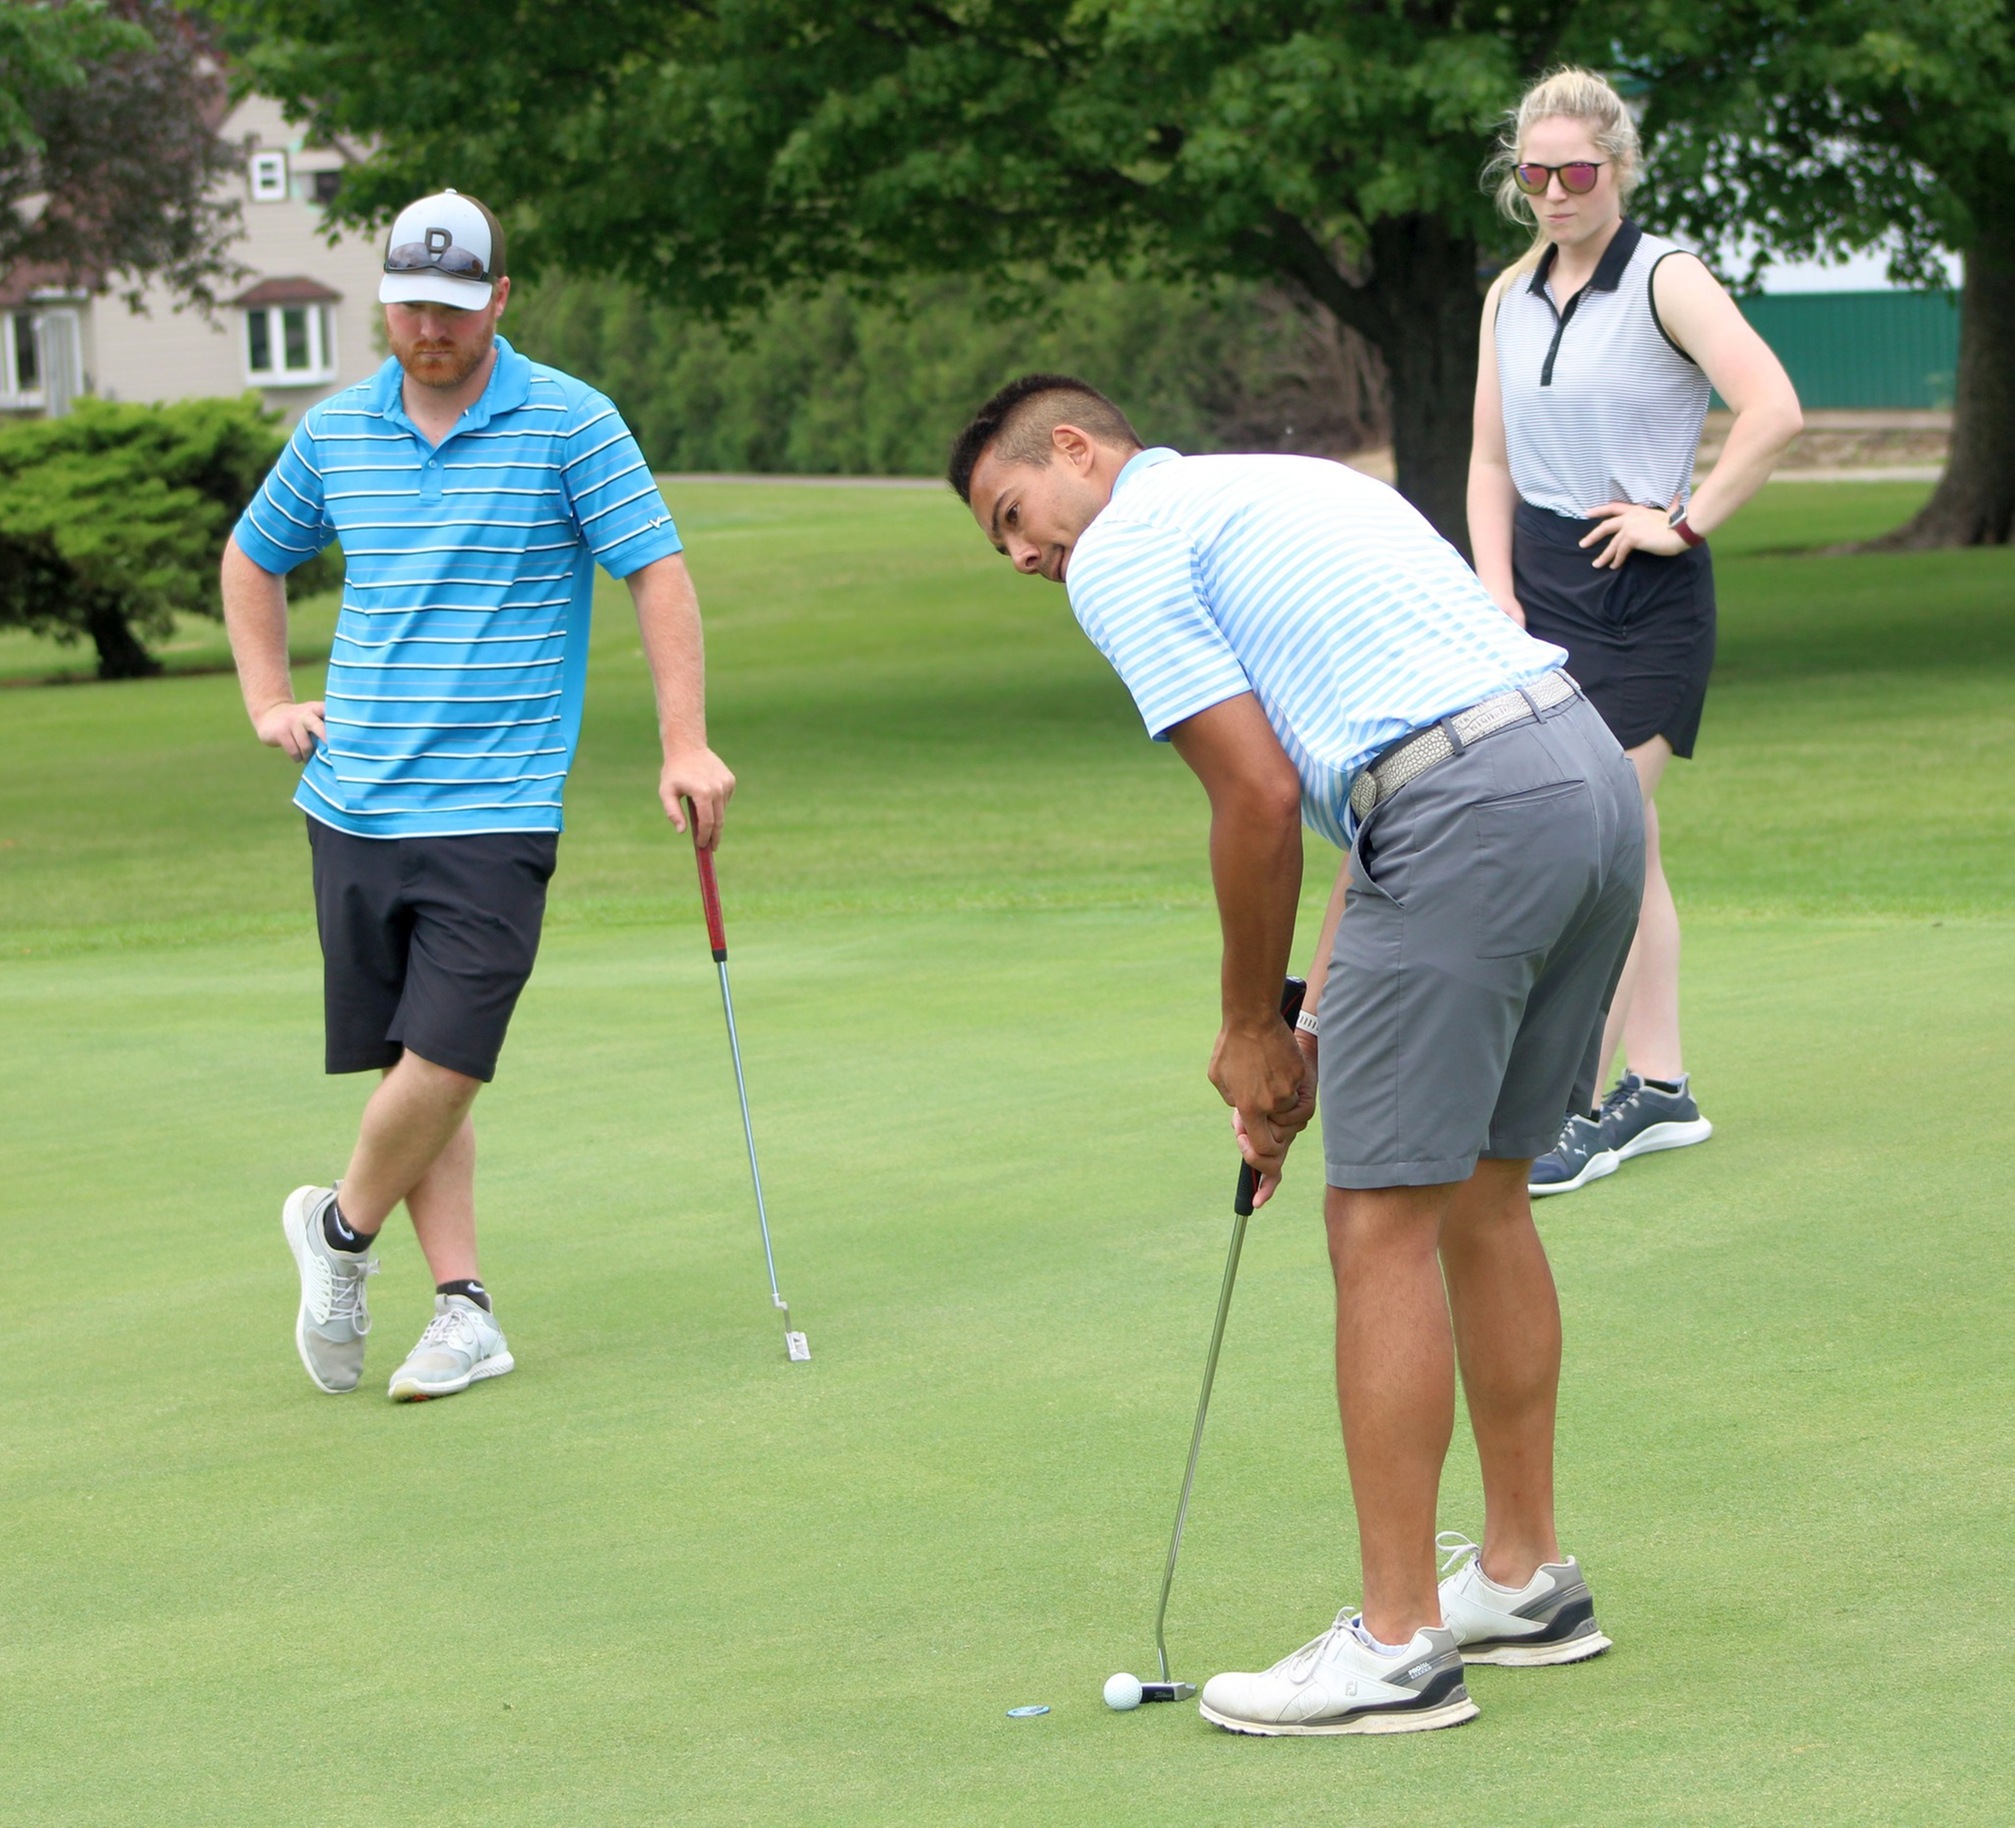 NIACC Athletics Golf Outing set for July 19